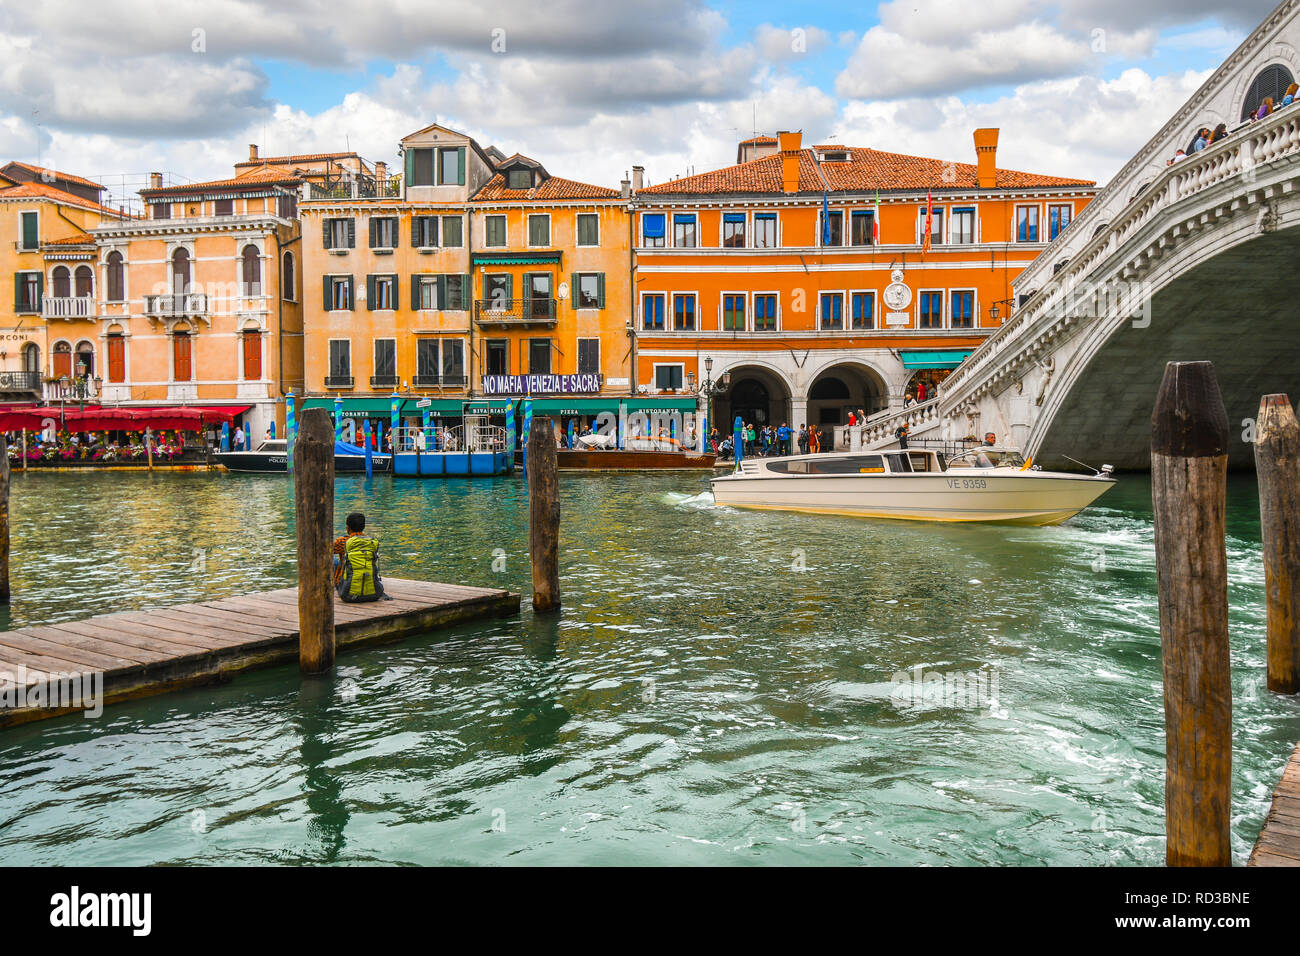 A man with a backpack sits on a dock, as tourists enjoy canal front cafes and a boat drives under the Rialto Bridge in Venice, Italy Stock Photo